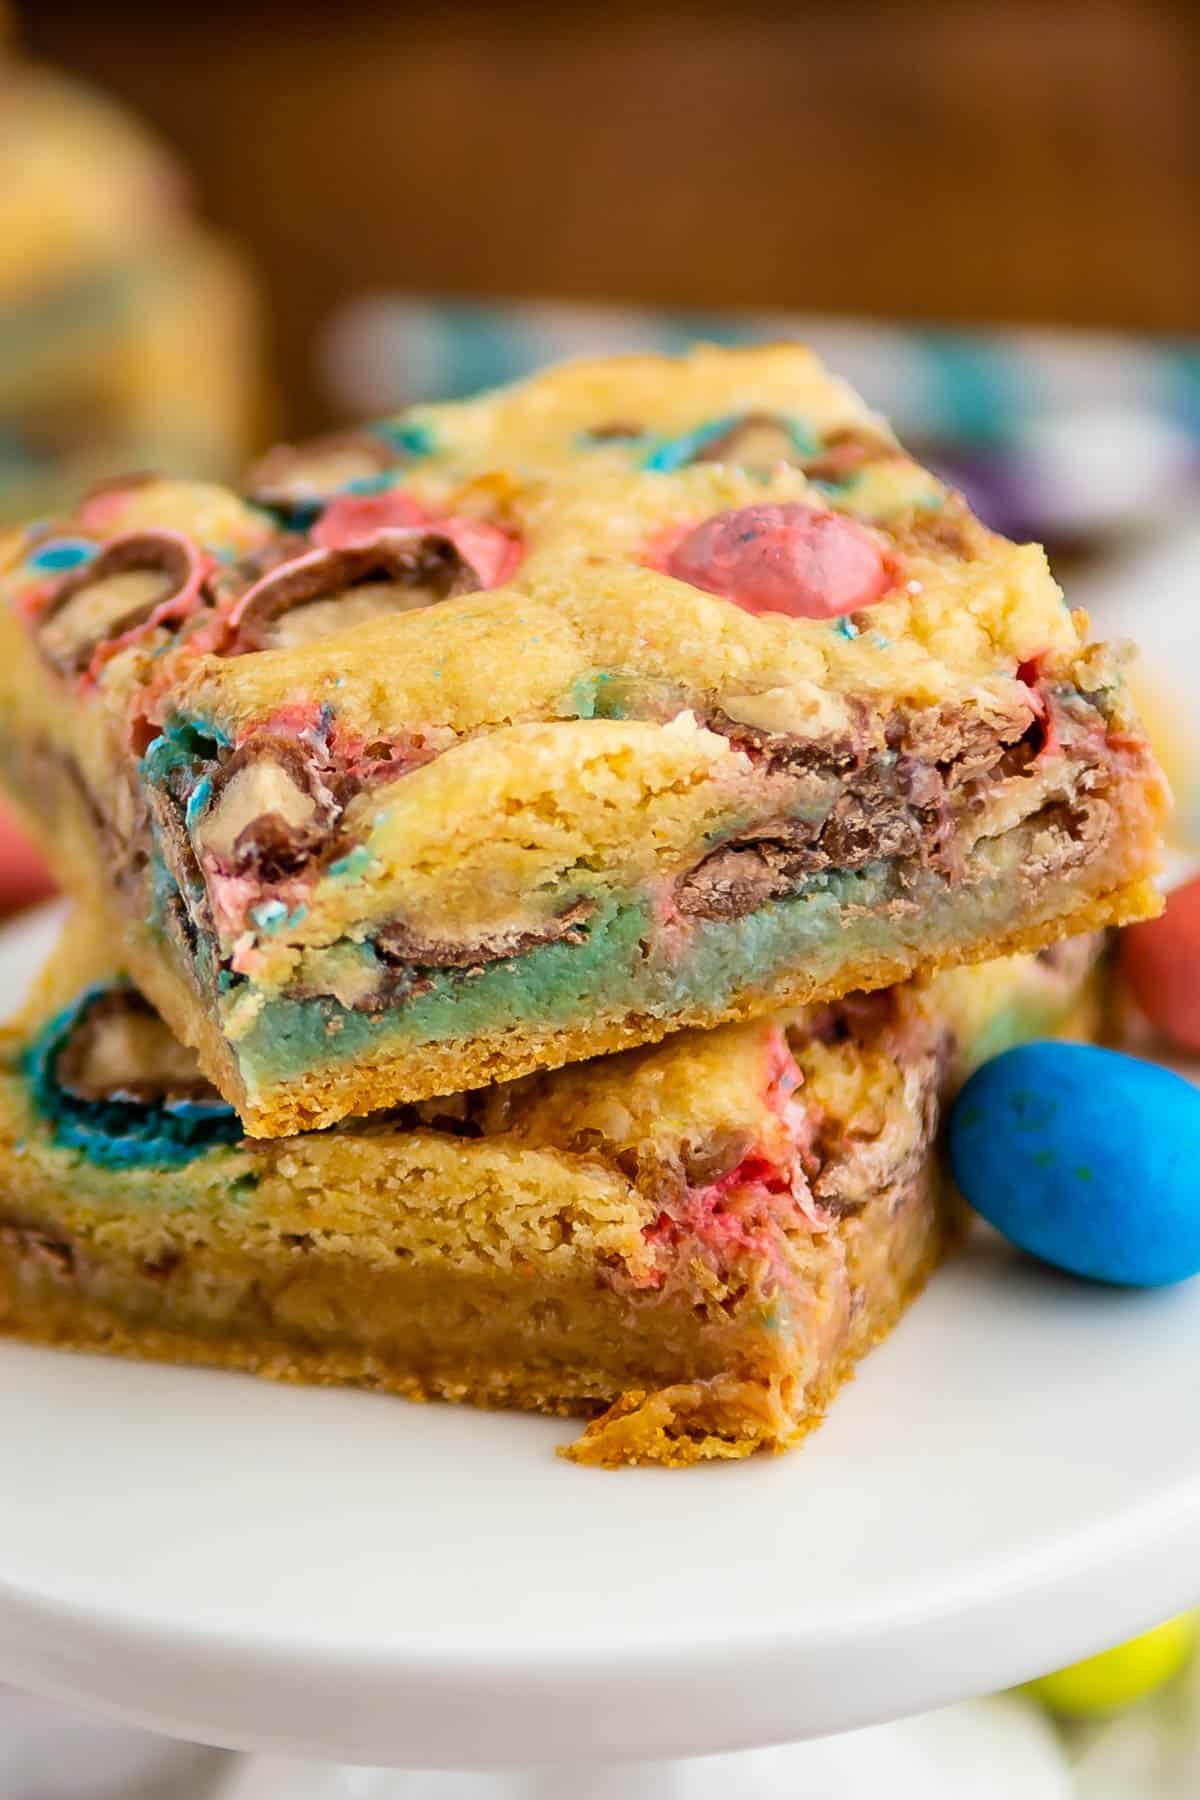 gooey bars with chocolate candies baked in.